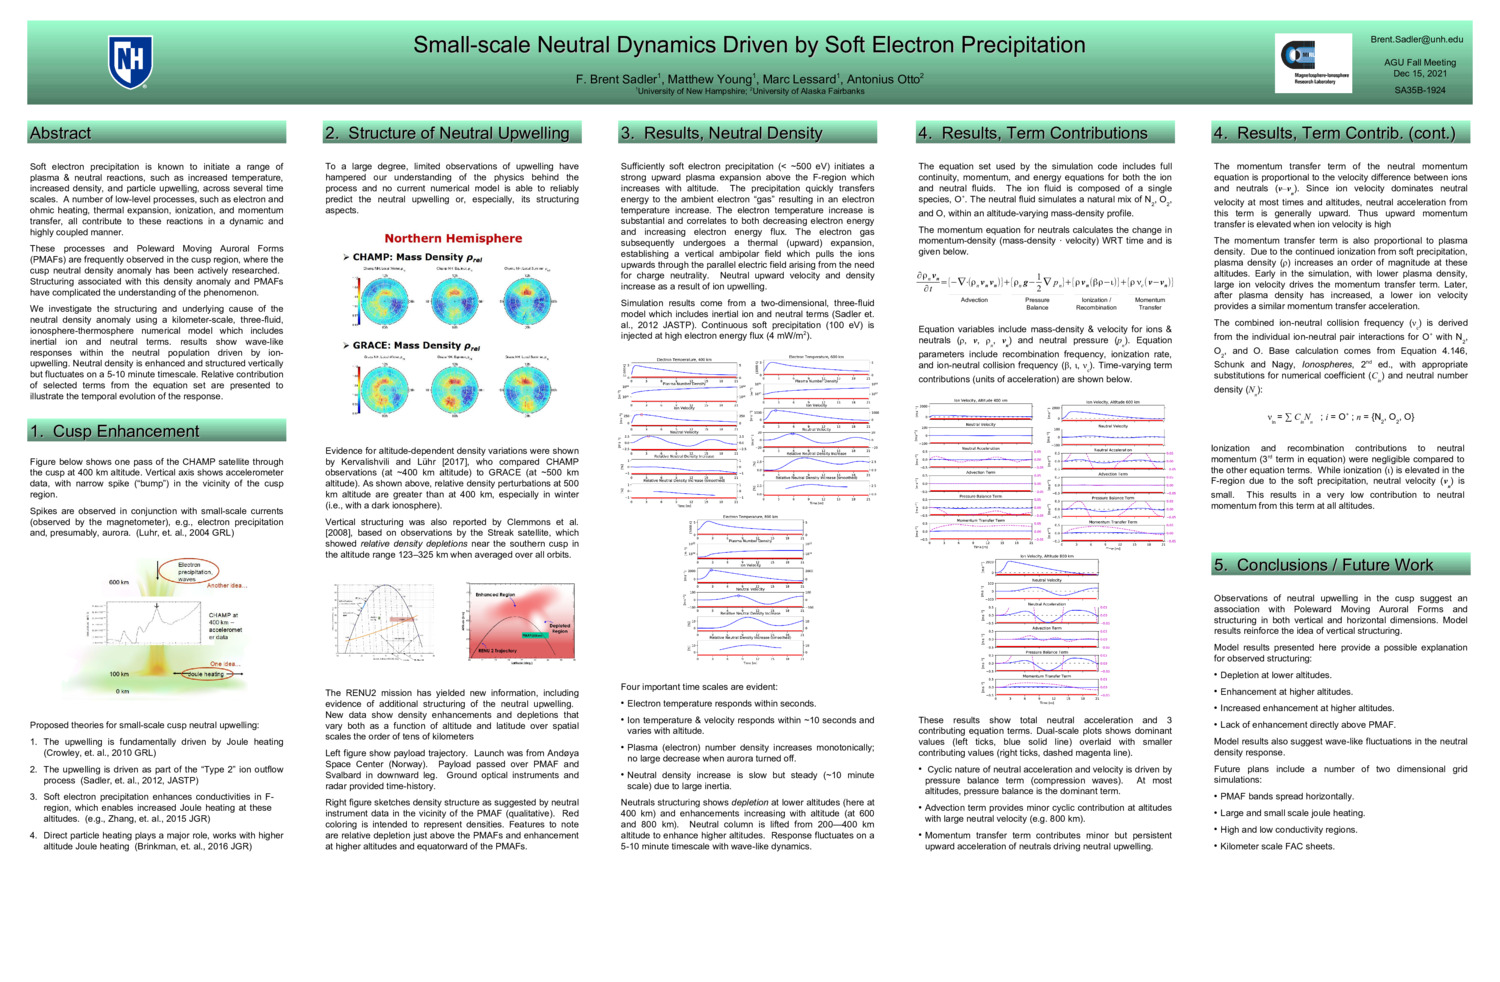 Small-Scale Neutral Dynamics Driven By Soft Electron Precipitation by bsadler